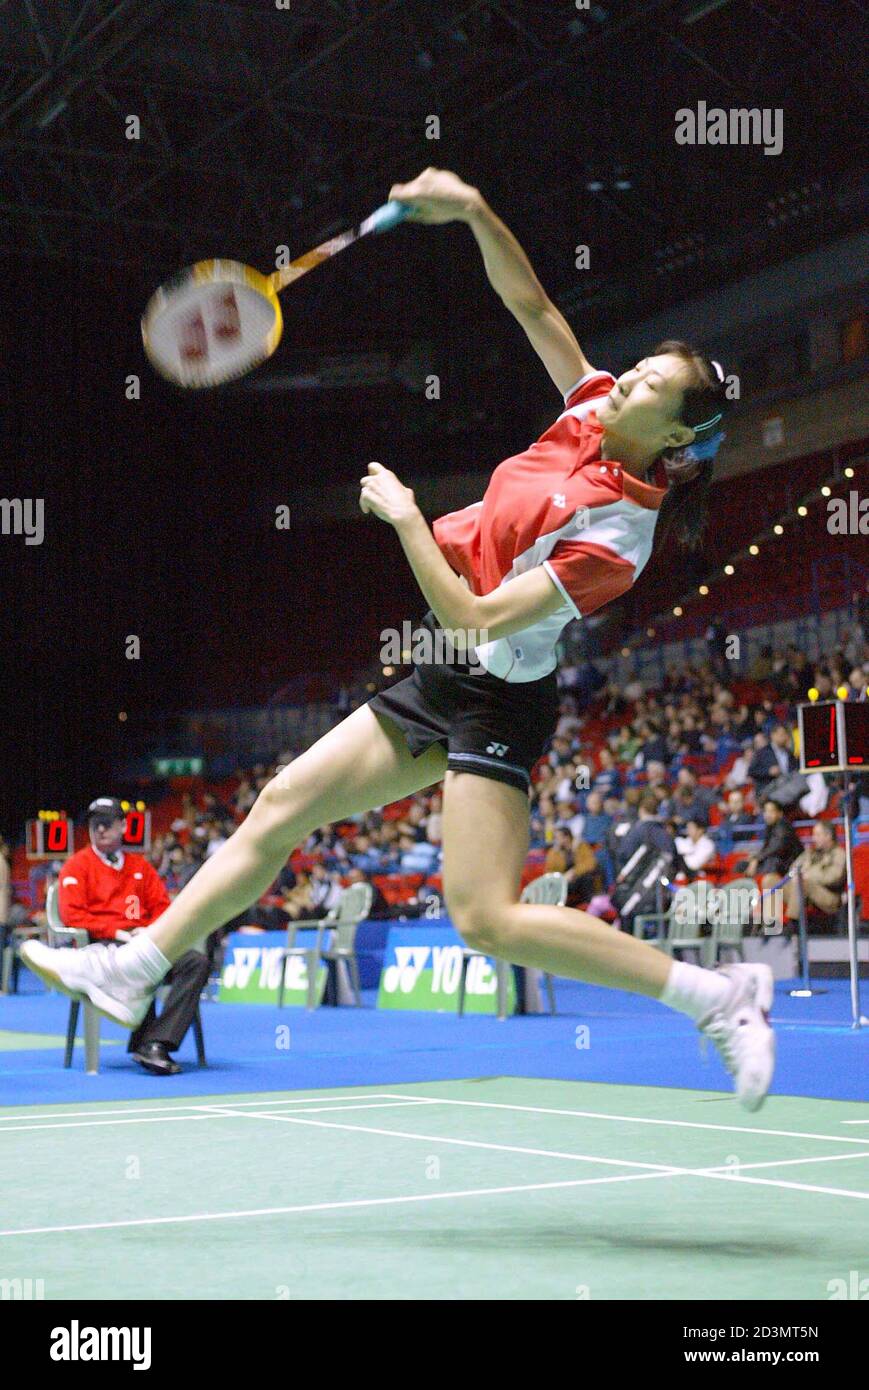 World number two Zhang Ning of China smashes a return to England's Julia  Mann during their second round match in the Women's Singles competition at  the All England Open Badminton Championships in